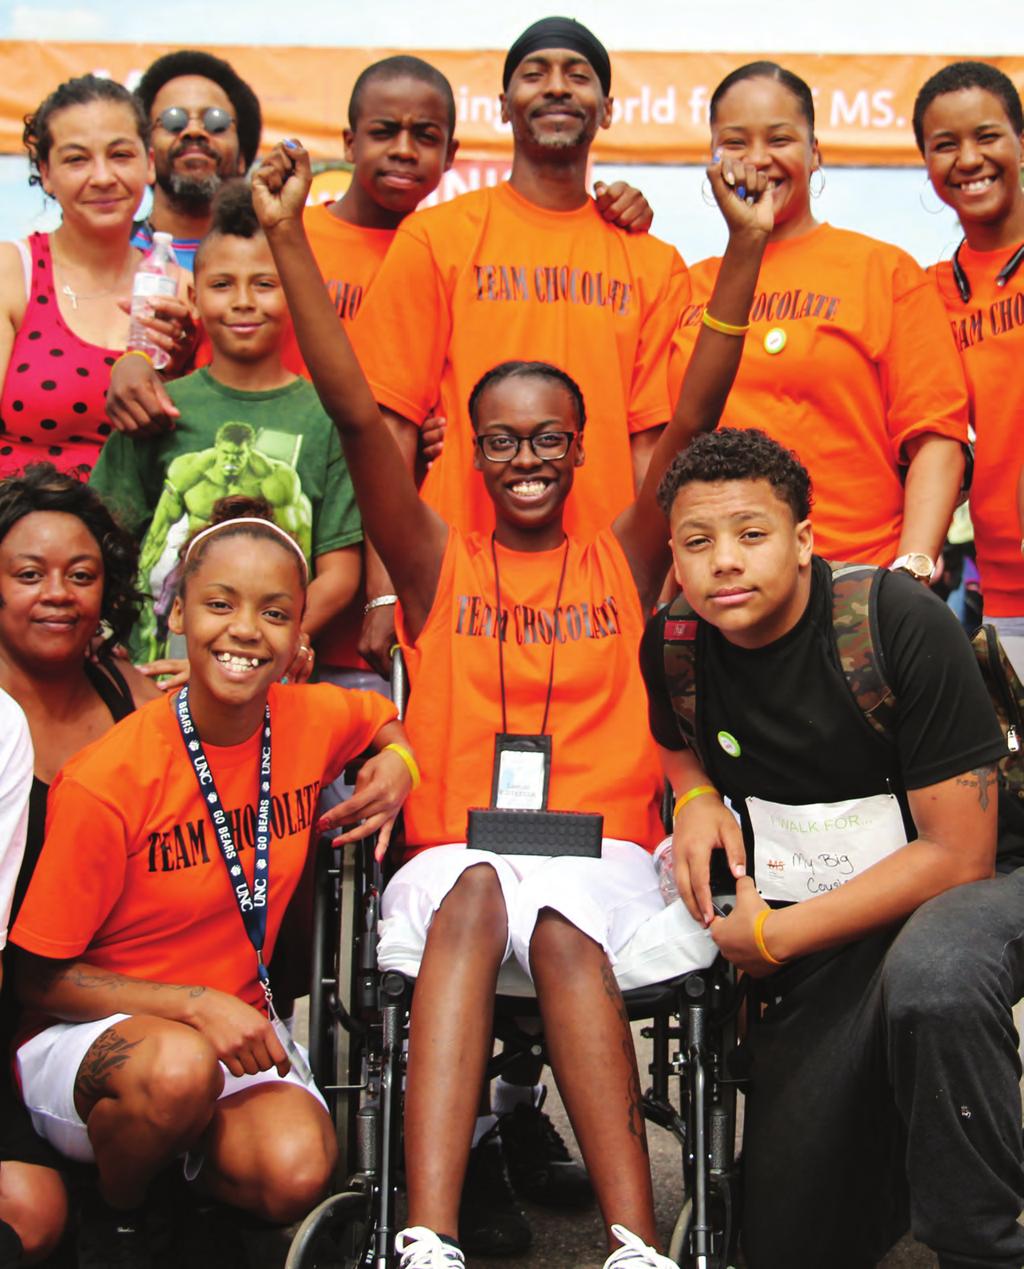 National Team fundraising helps people living with MS like Dominique (center), diagnosed in 2015